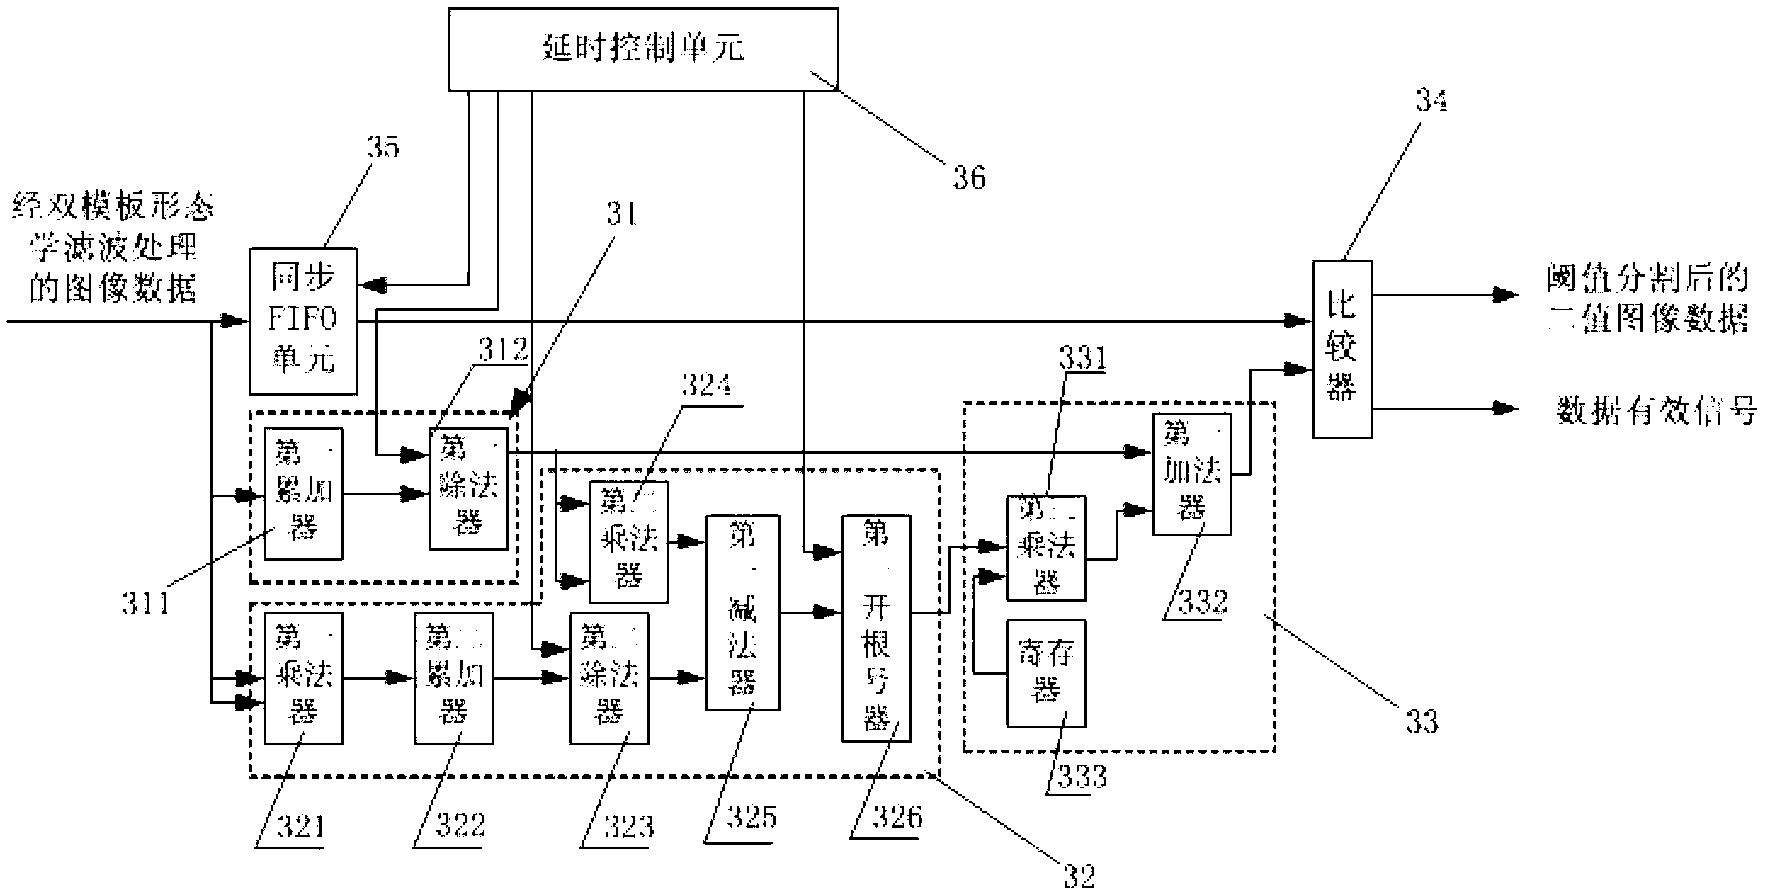 Small target image processing device